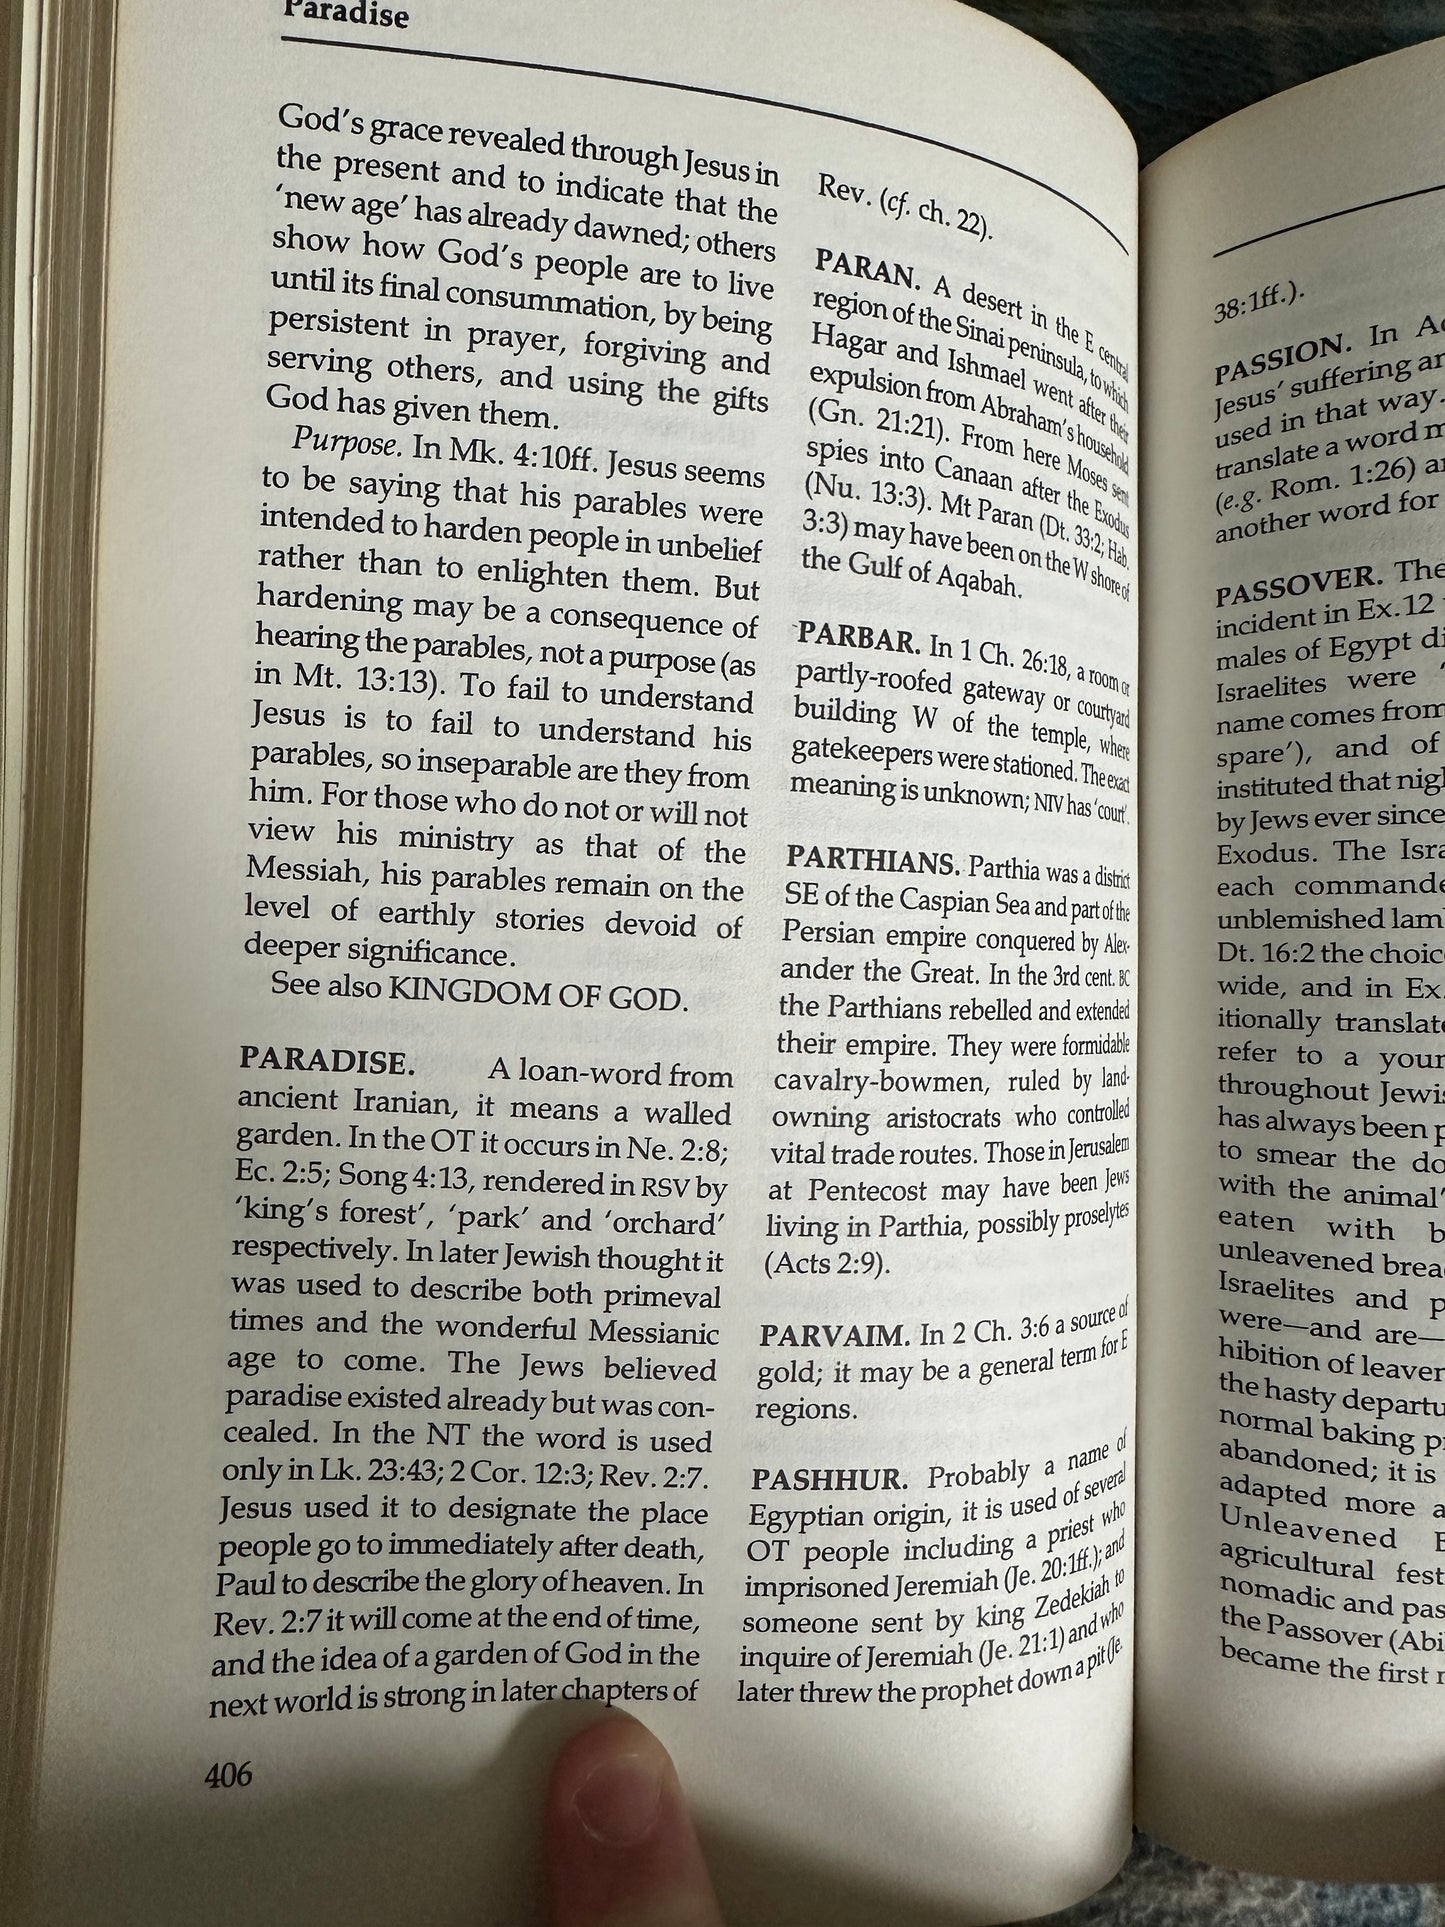 1989 New Concise Bible Dictionary - Inter-Varsity Press